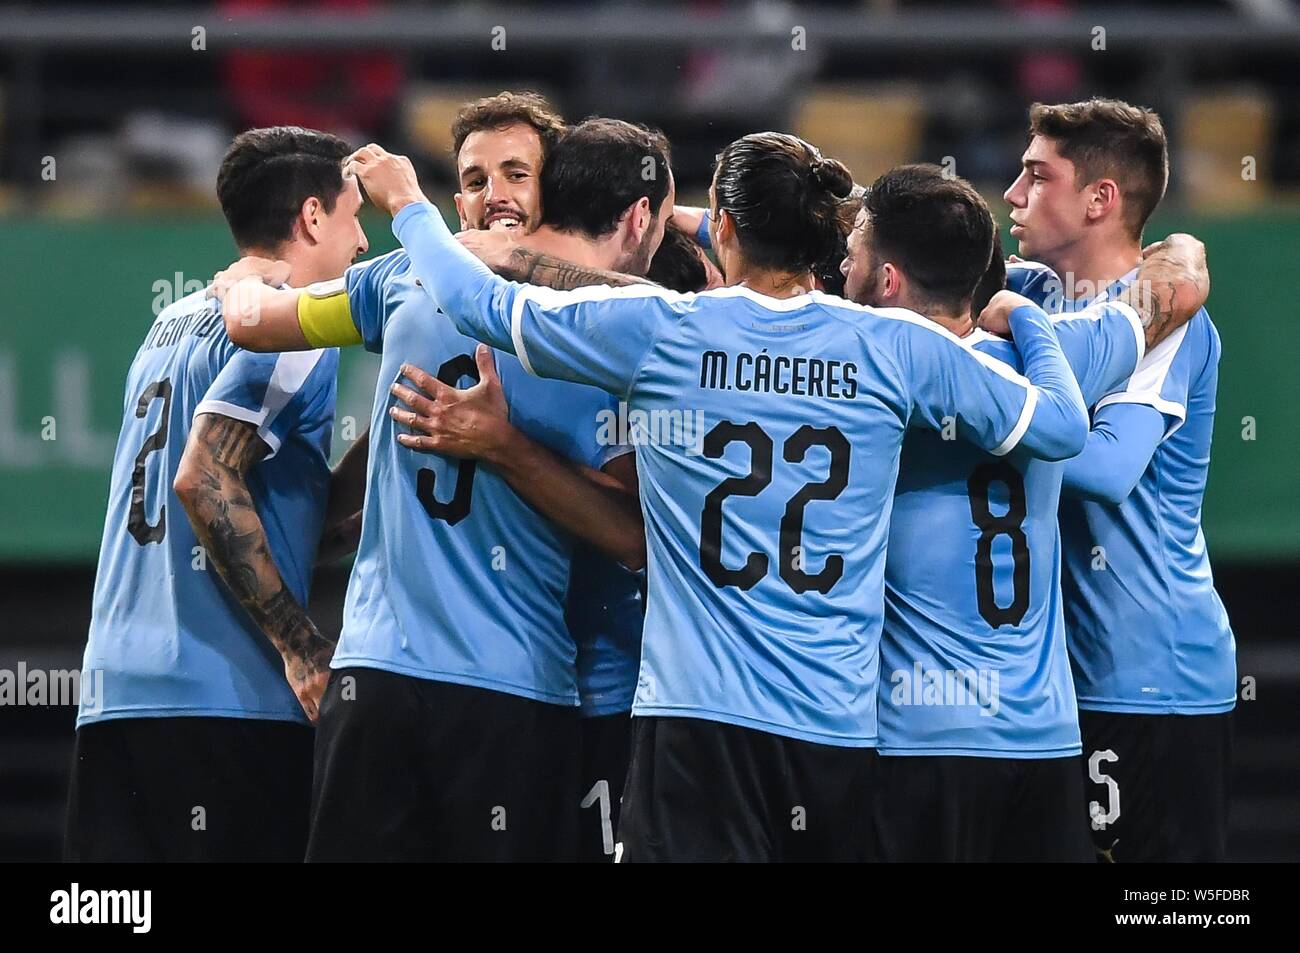 Cristhian Stuani, center left, of Uruguay national football team celebrates with his teammates after scoring against Thailand national football team d Stock Photo